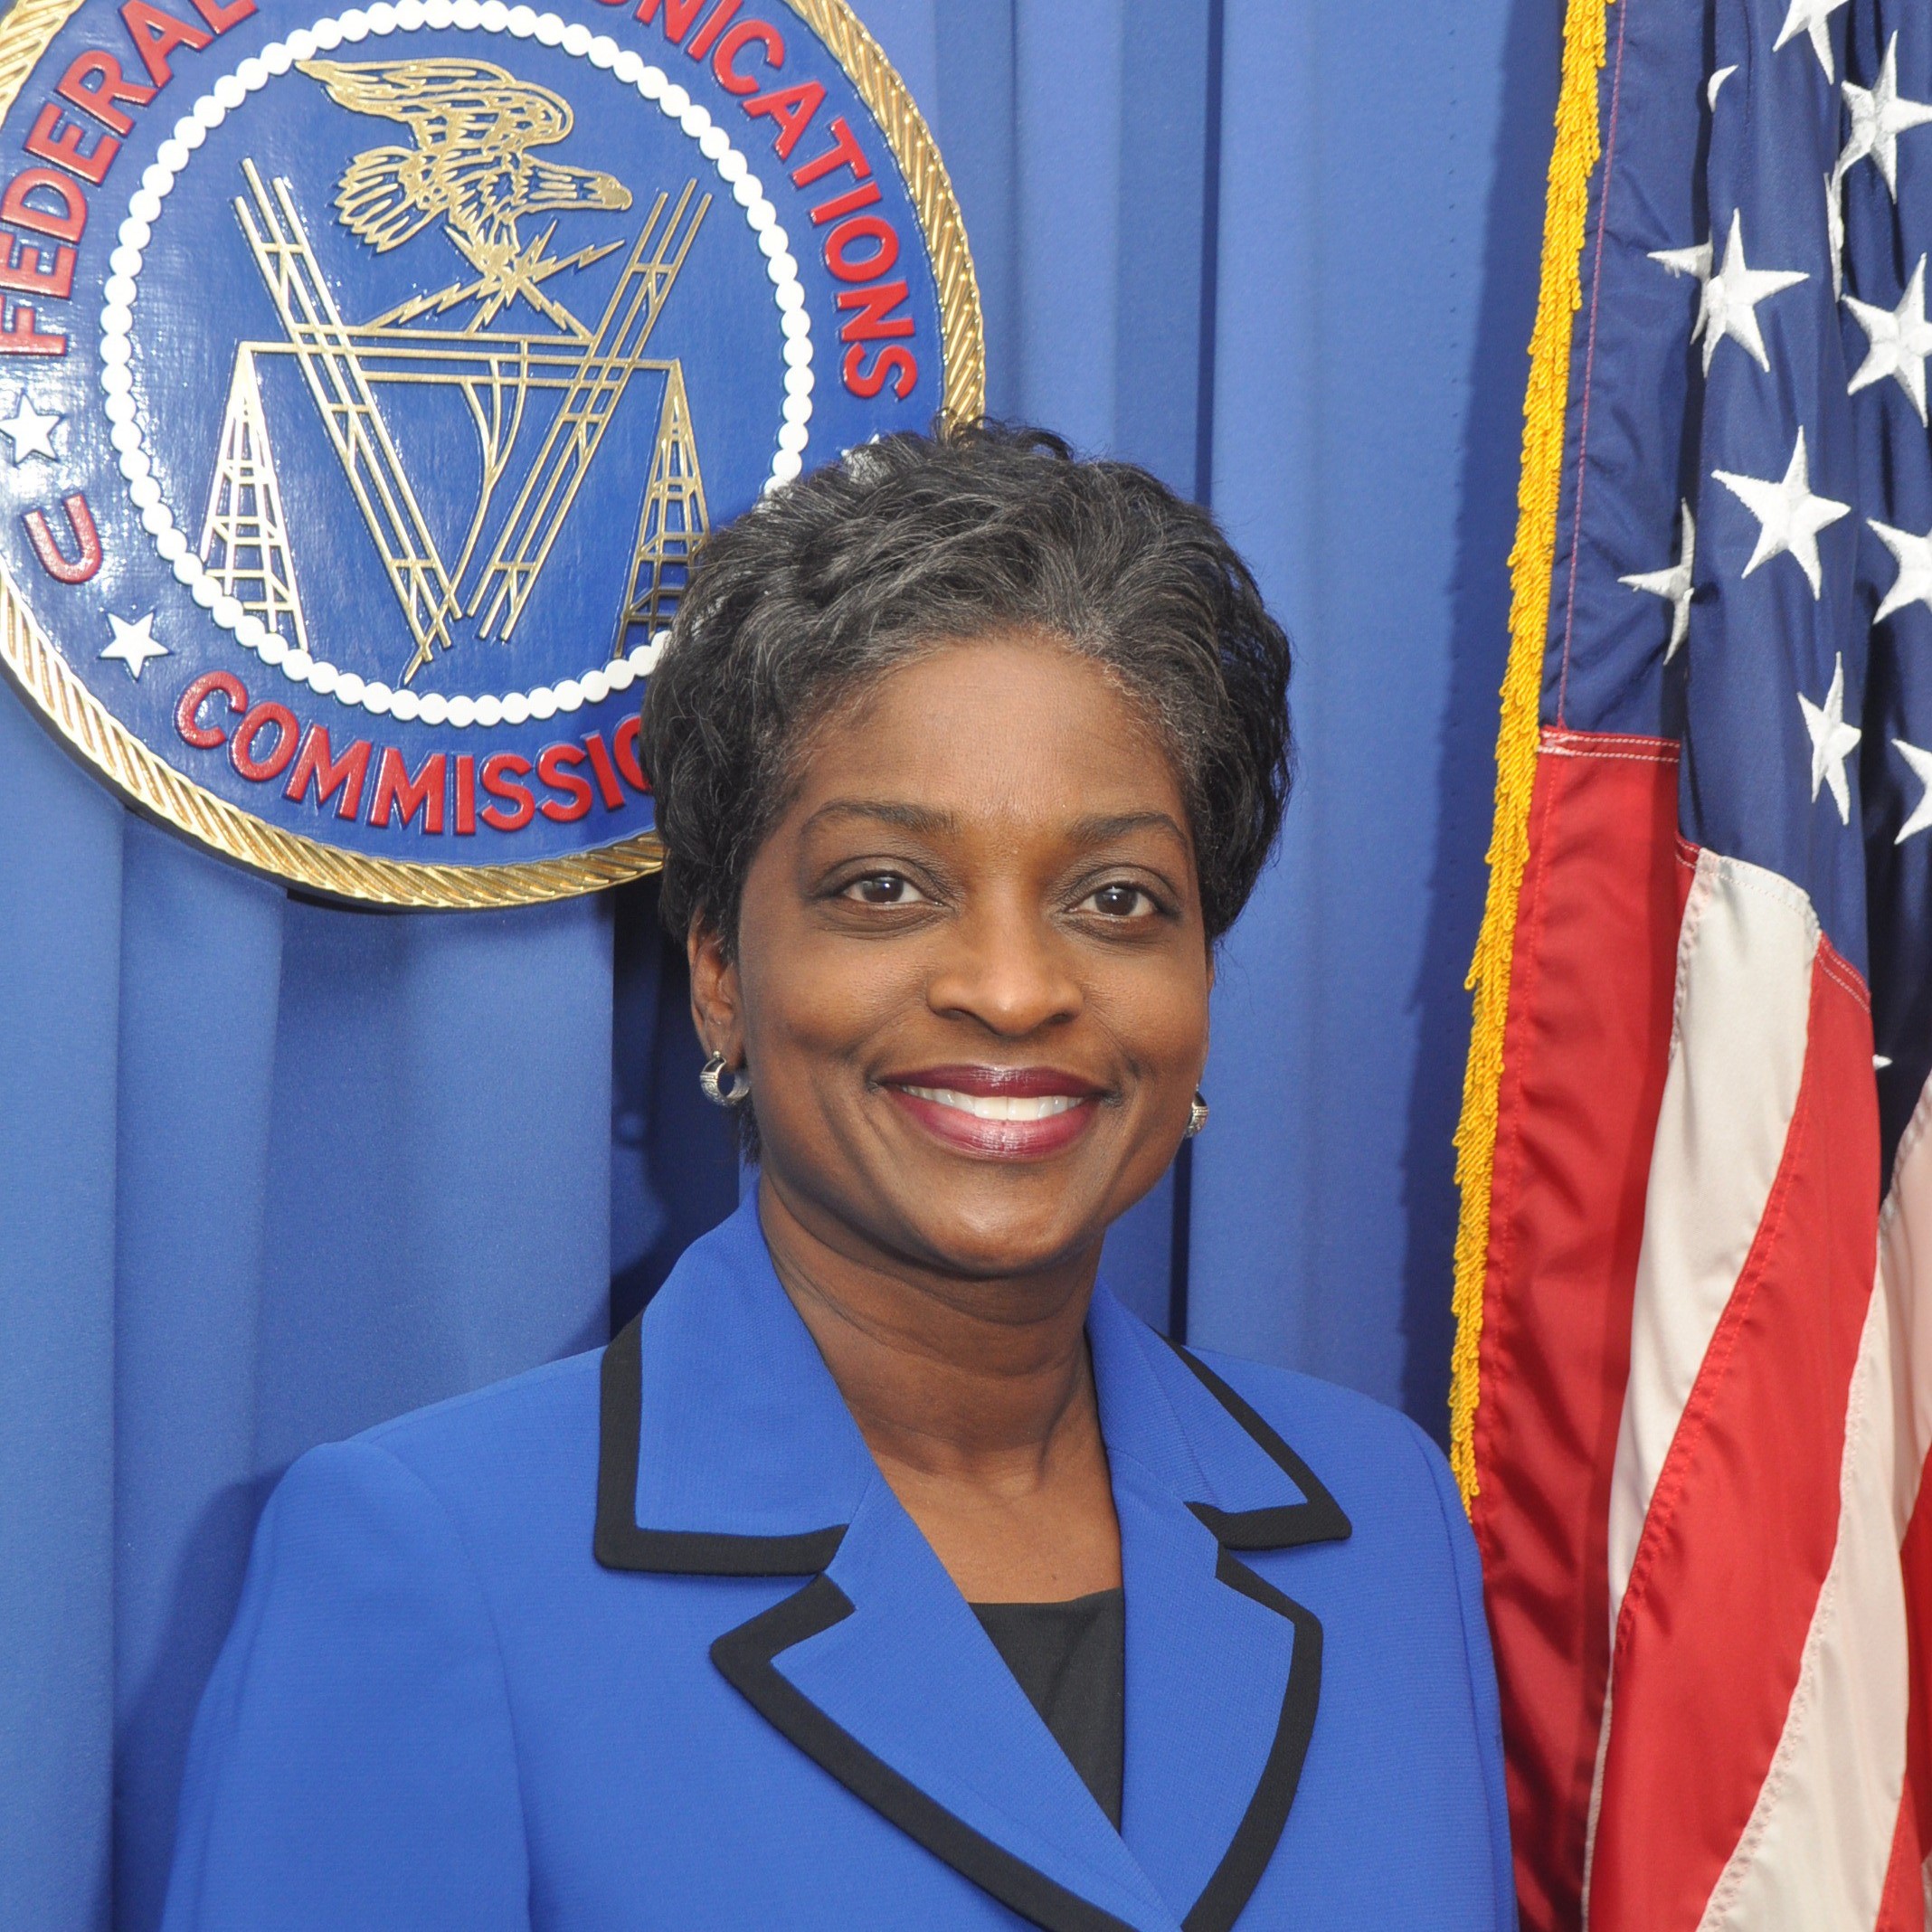 Image of Mignon Clyburn wearing blue jacket and smiling